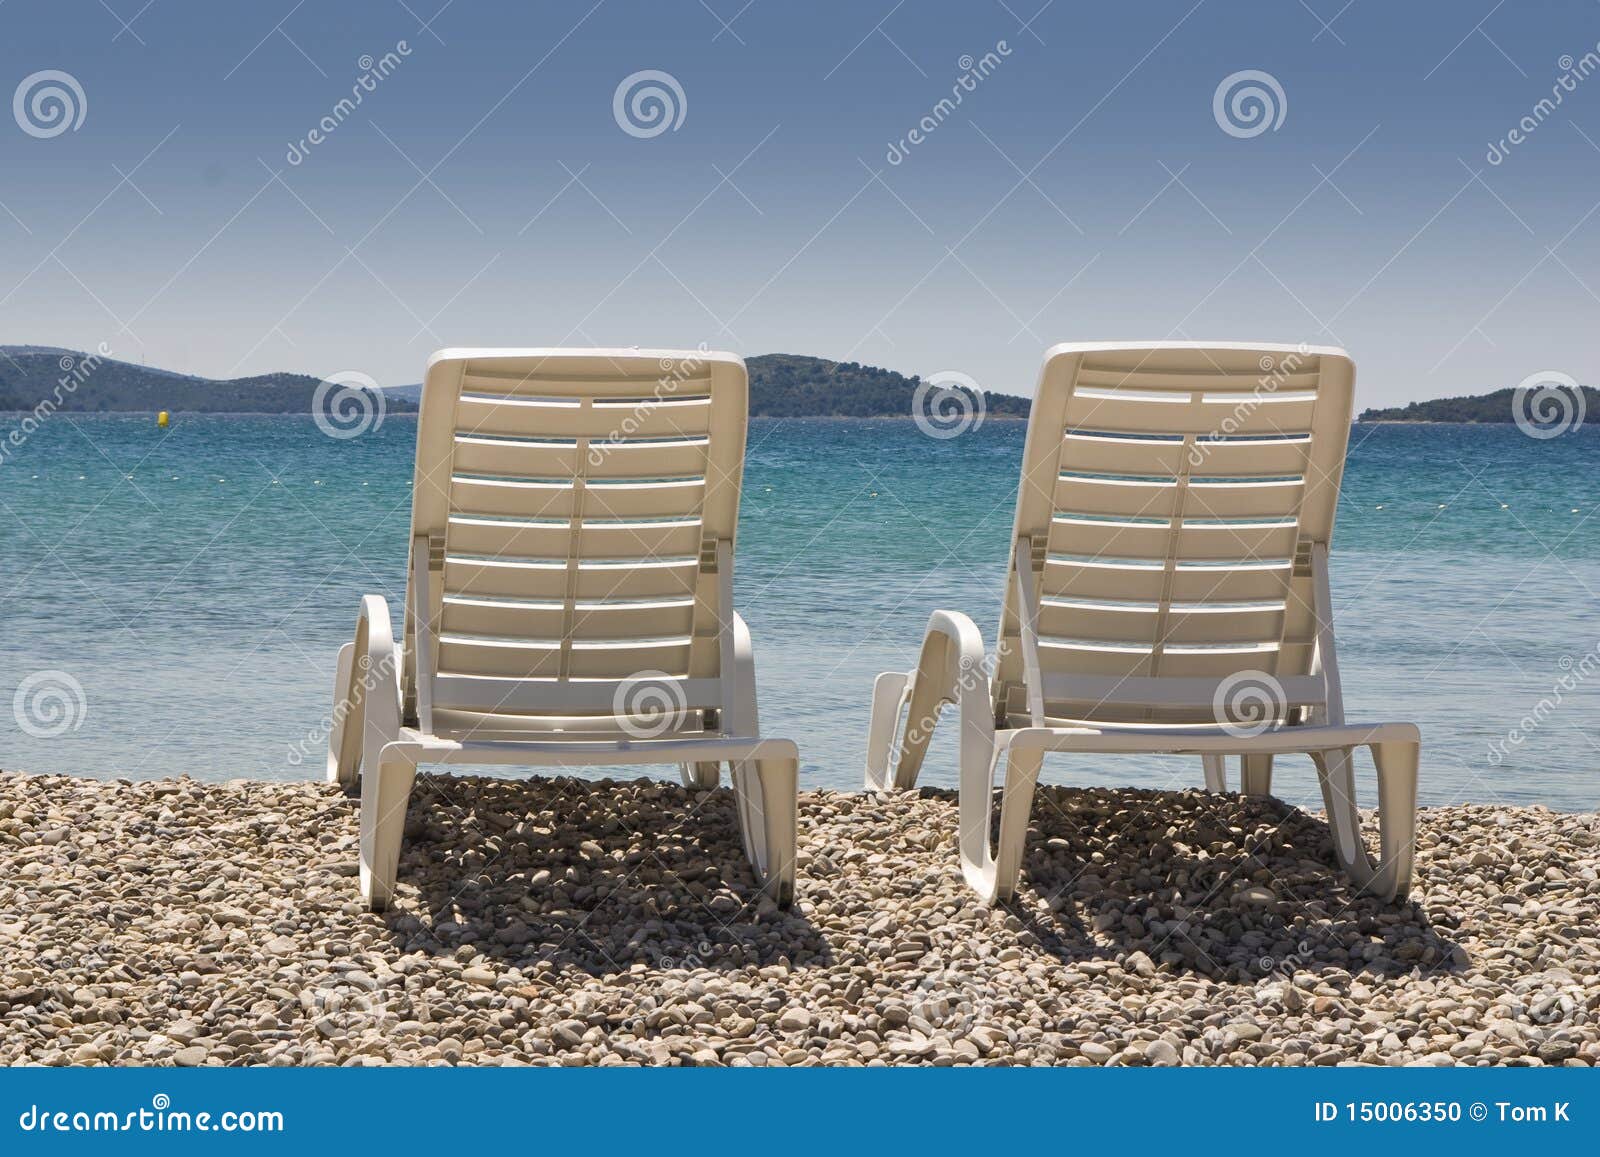 Plastic Chairs On The Beach Stock Photo Image of calm